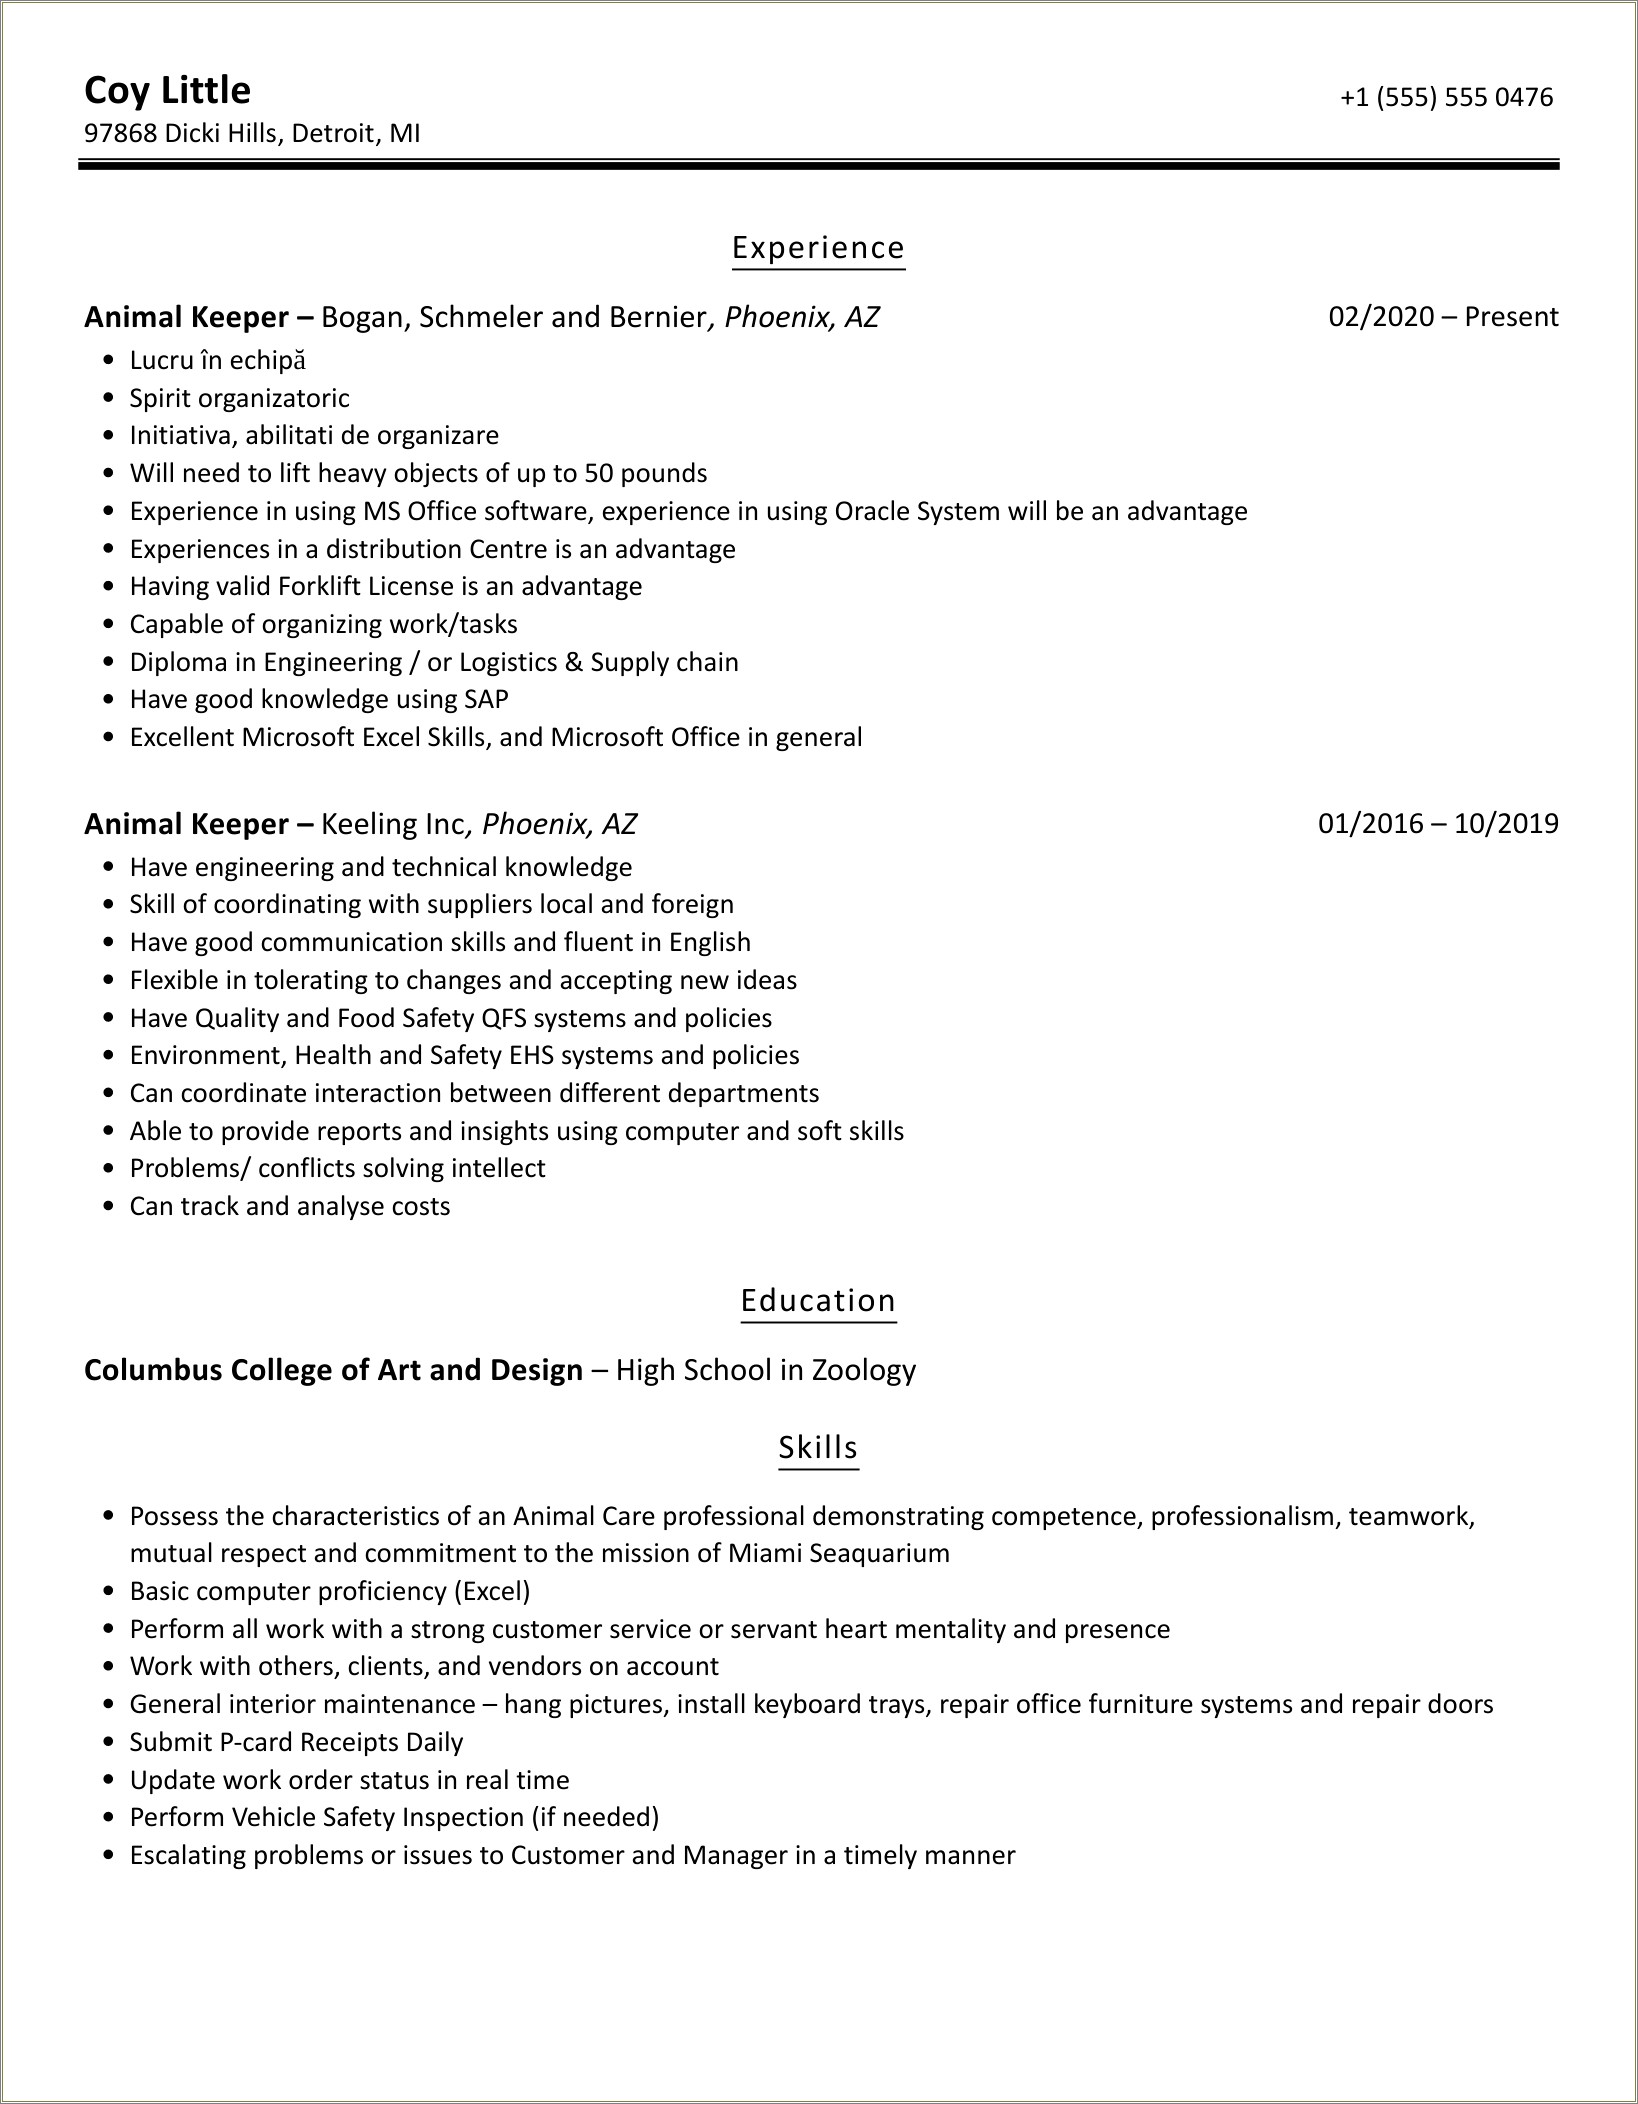 Area Of Expertise Zookeeper Example Resume